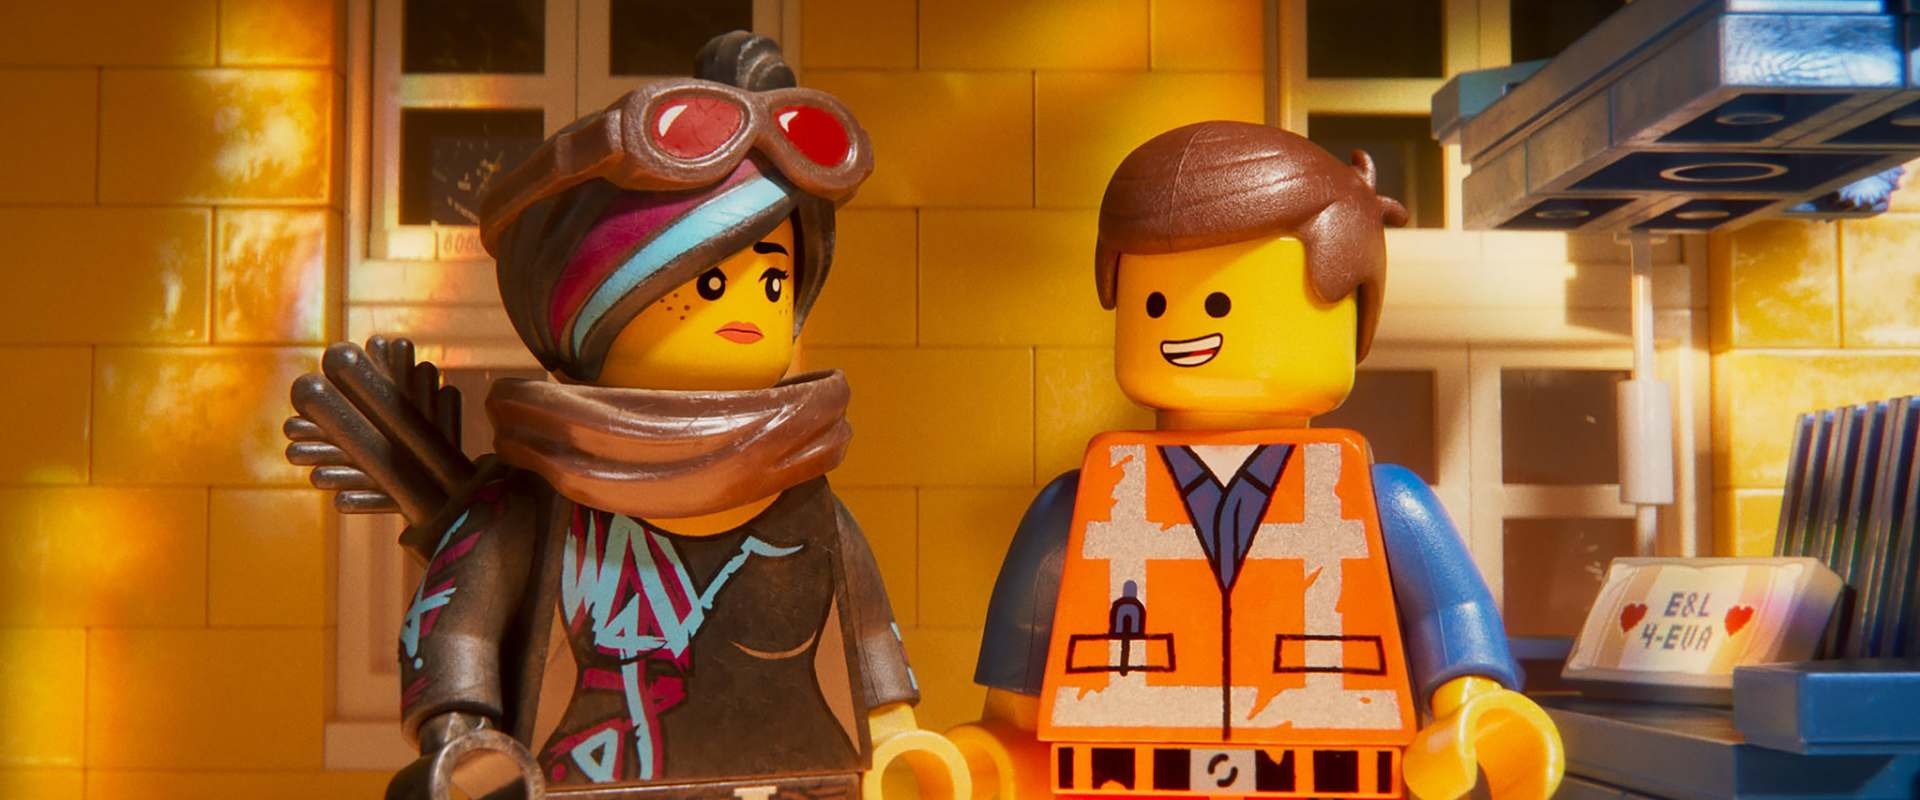 How To Watch The Lego Movie